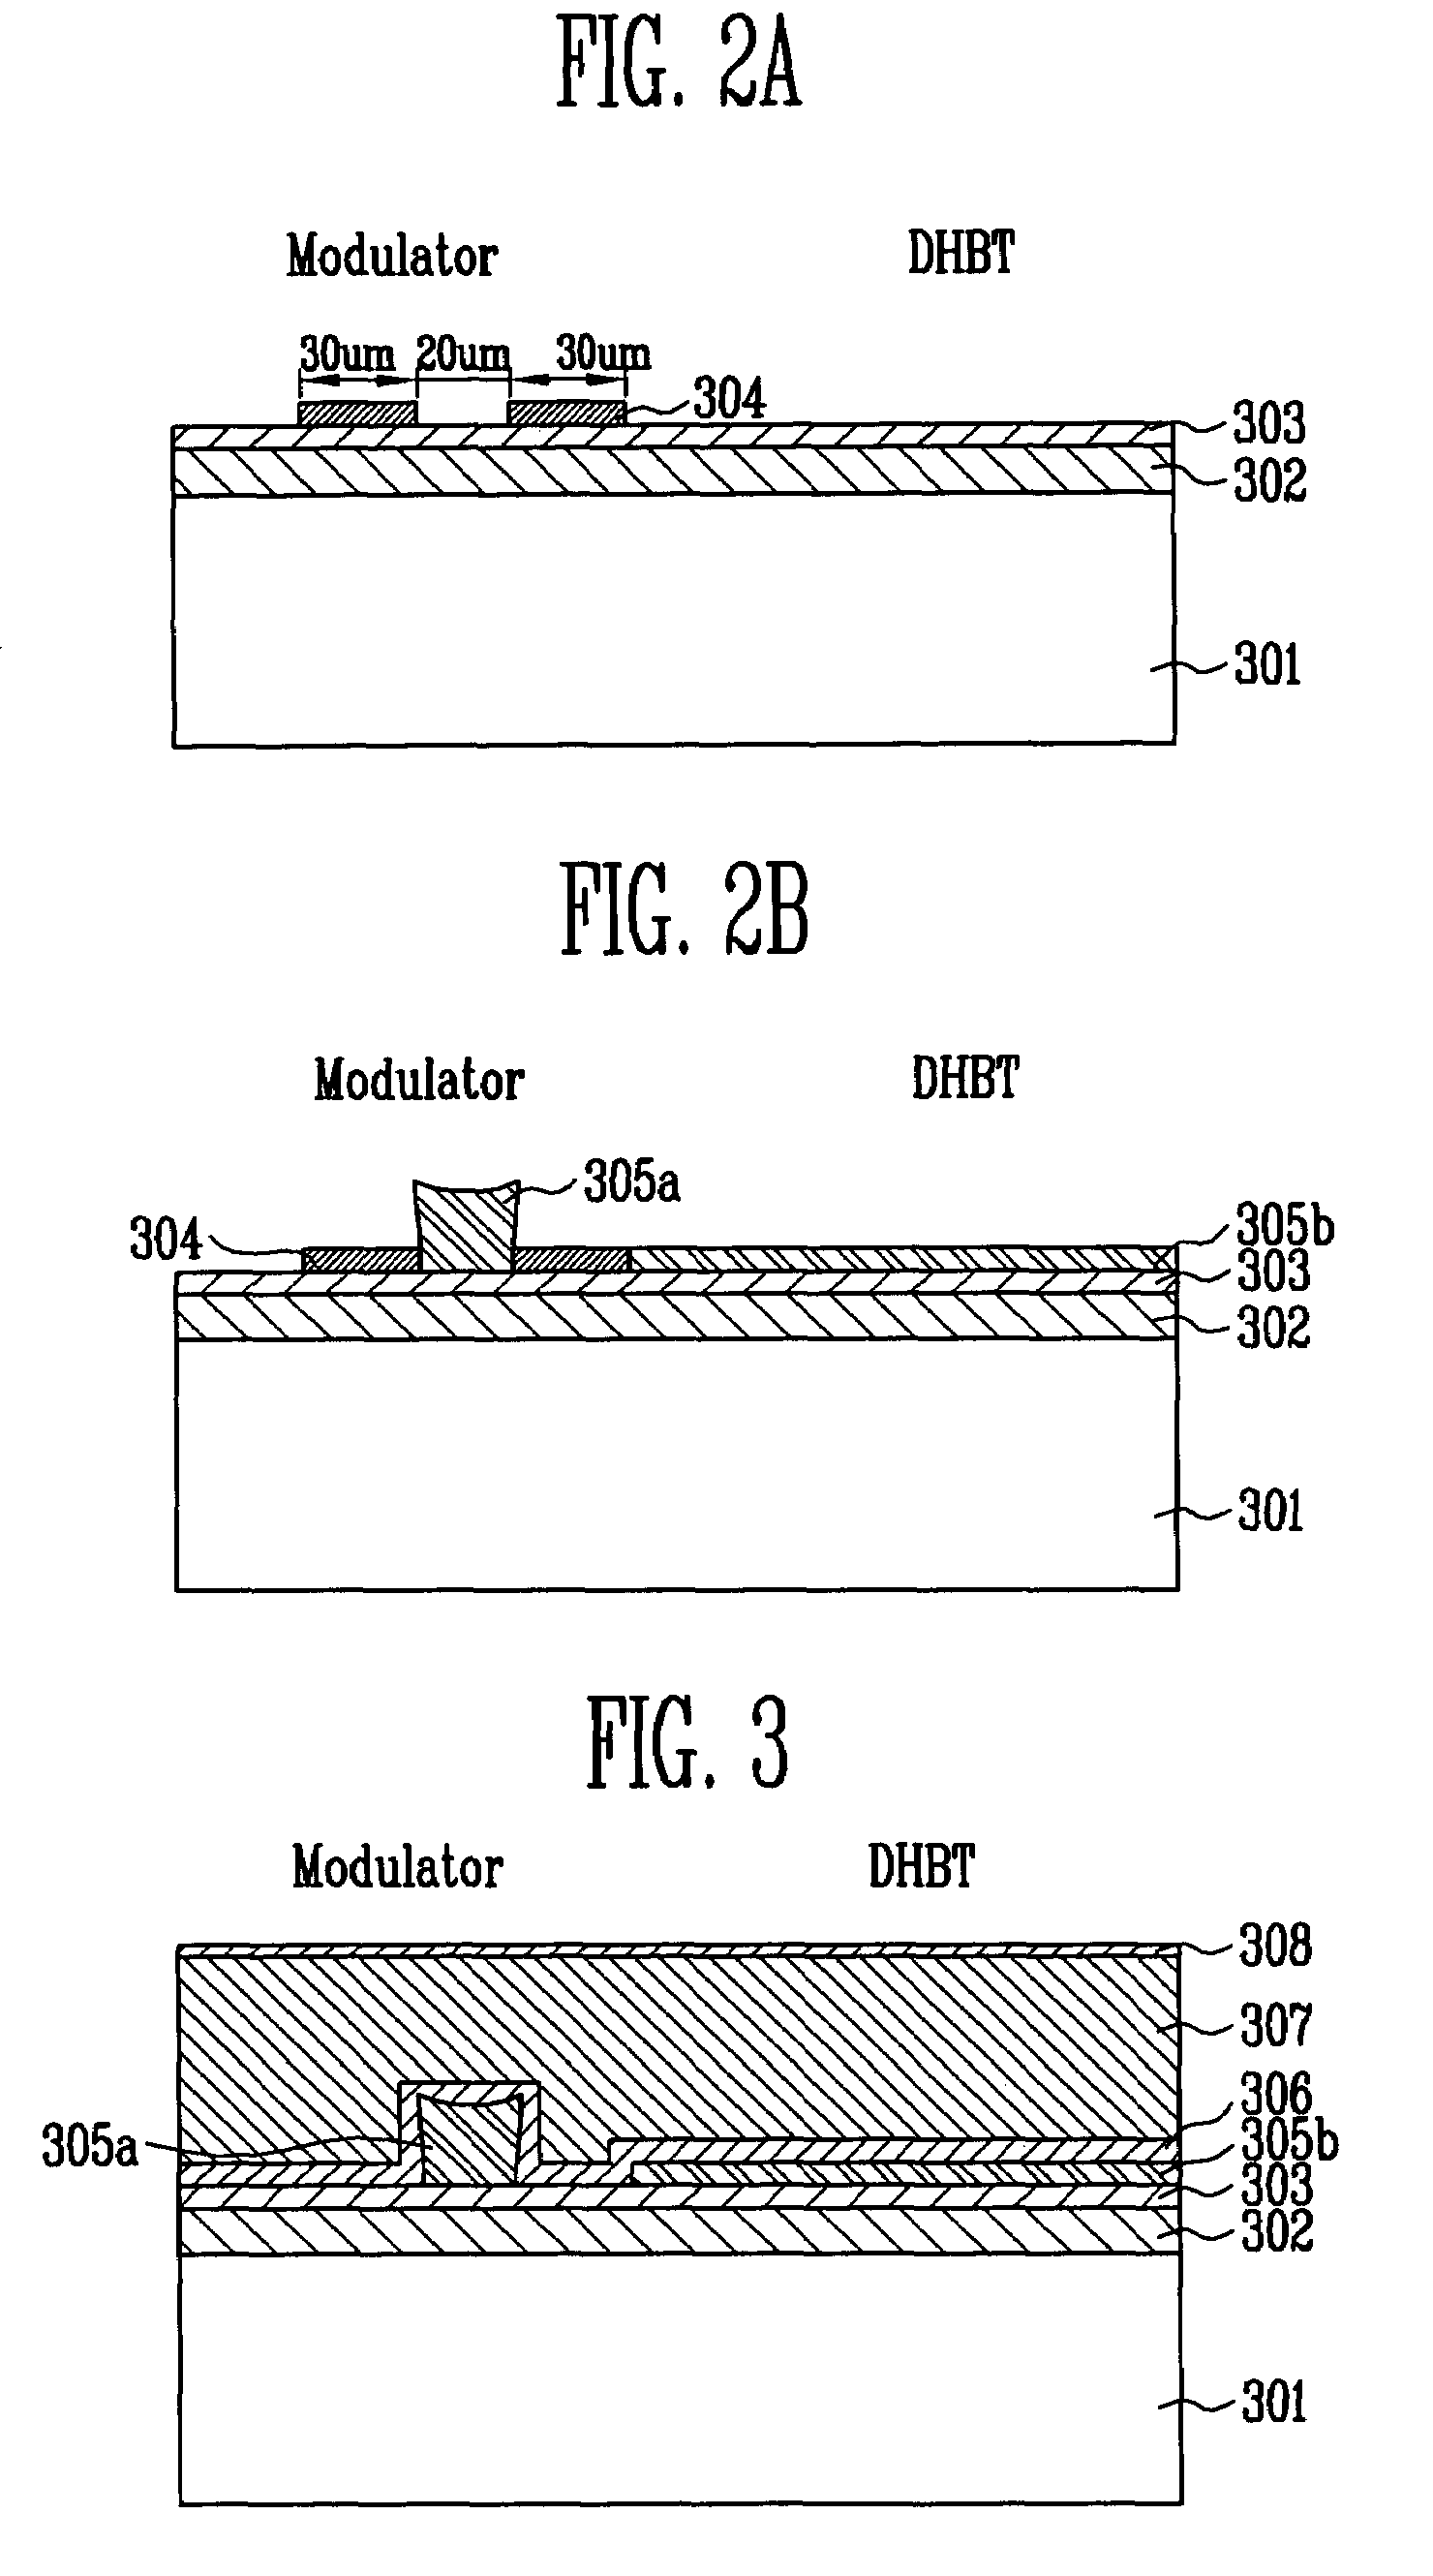 Optoelectronic transmitter integrated circuit and method of fabricating the same using selective growth process